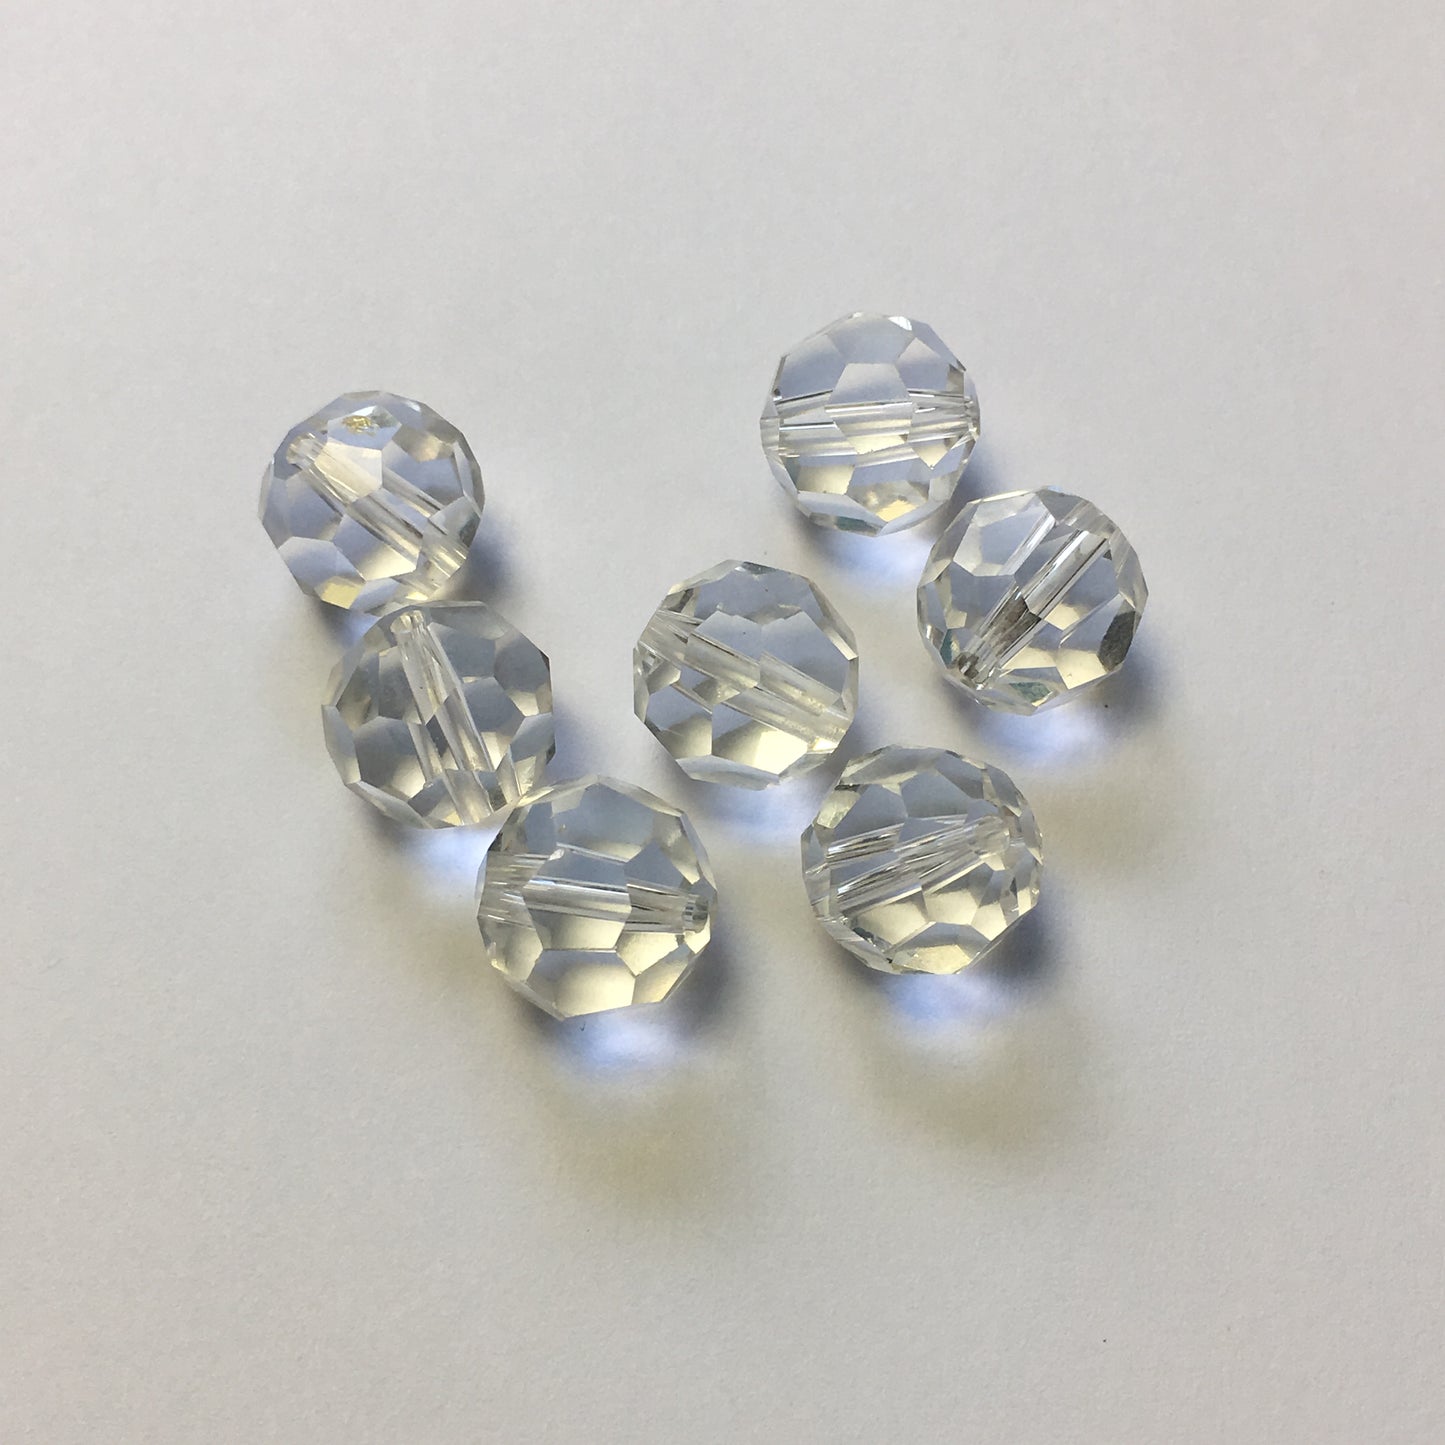 Clear Faceted Glass Round Beads, 12 mm -  7 Beads